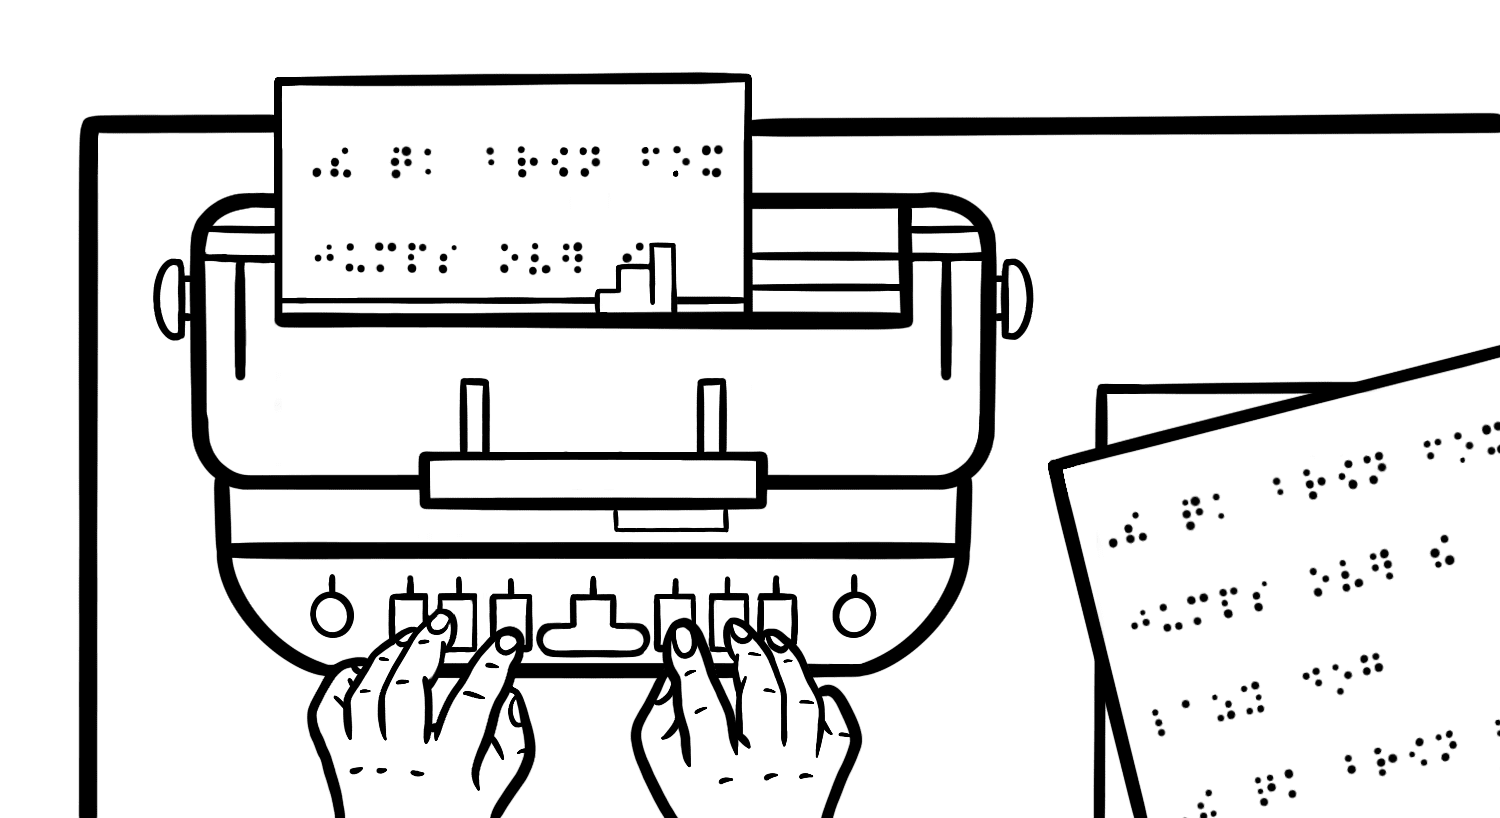 A person using a brailler which appears to be a specialized typewriter that outputs brailler onto a paper. There is a piece of paper coming out of the brailler as well as a couple lying next to it.